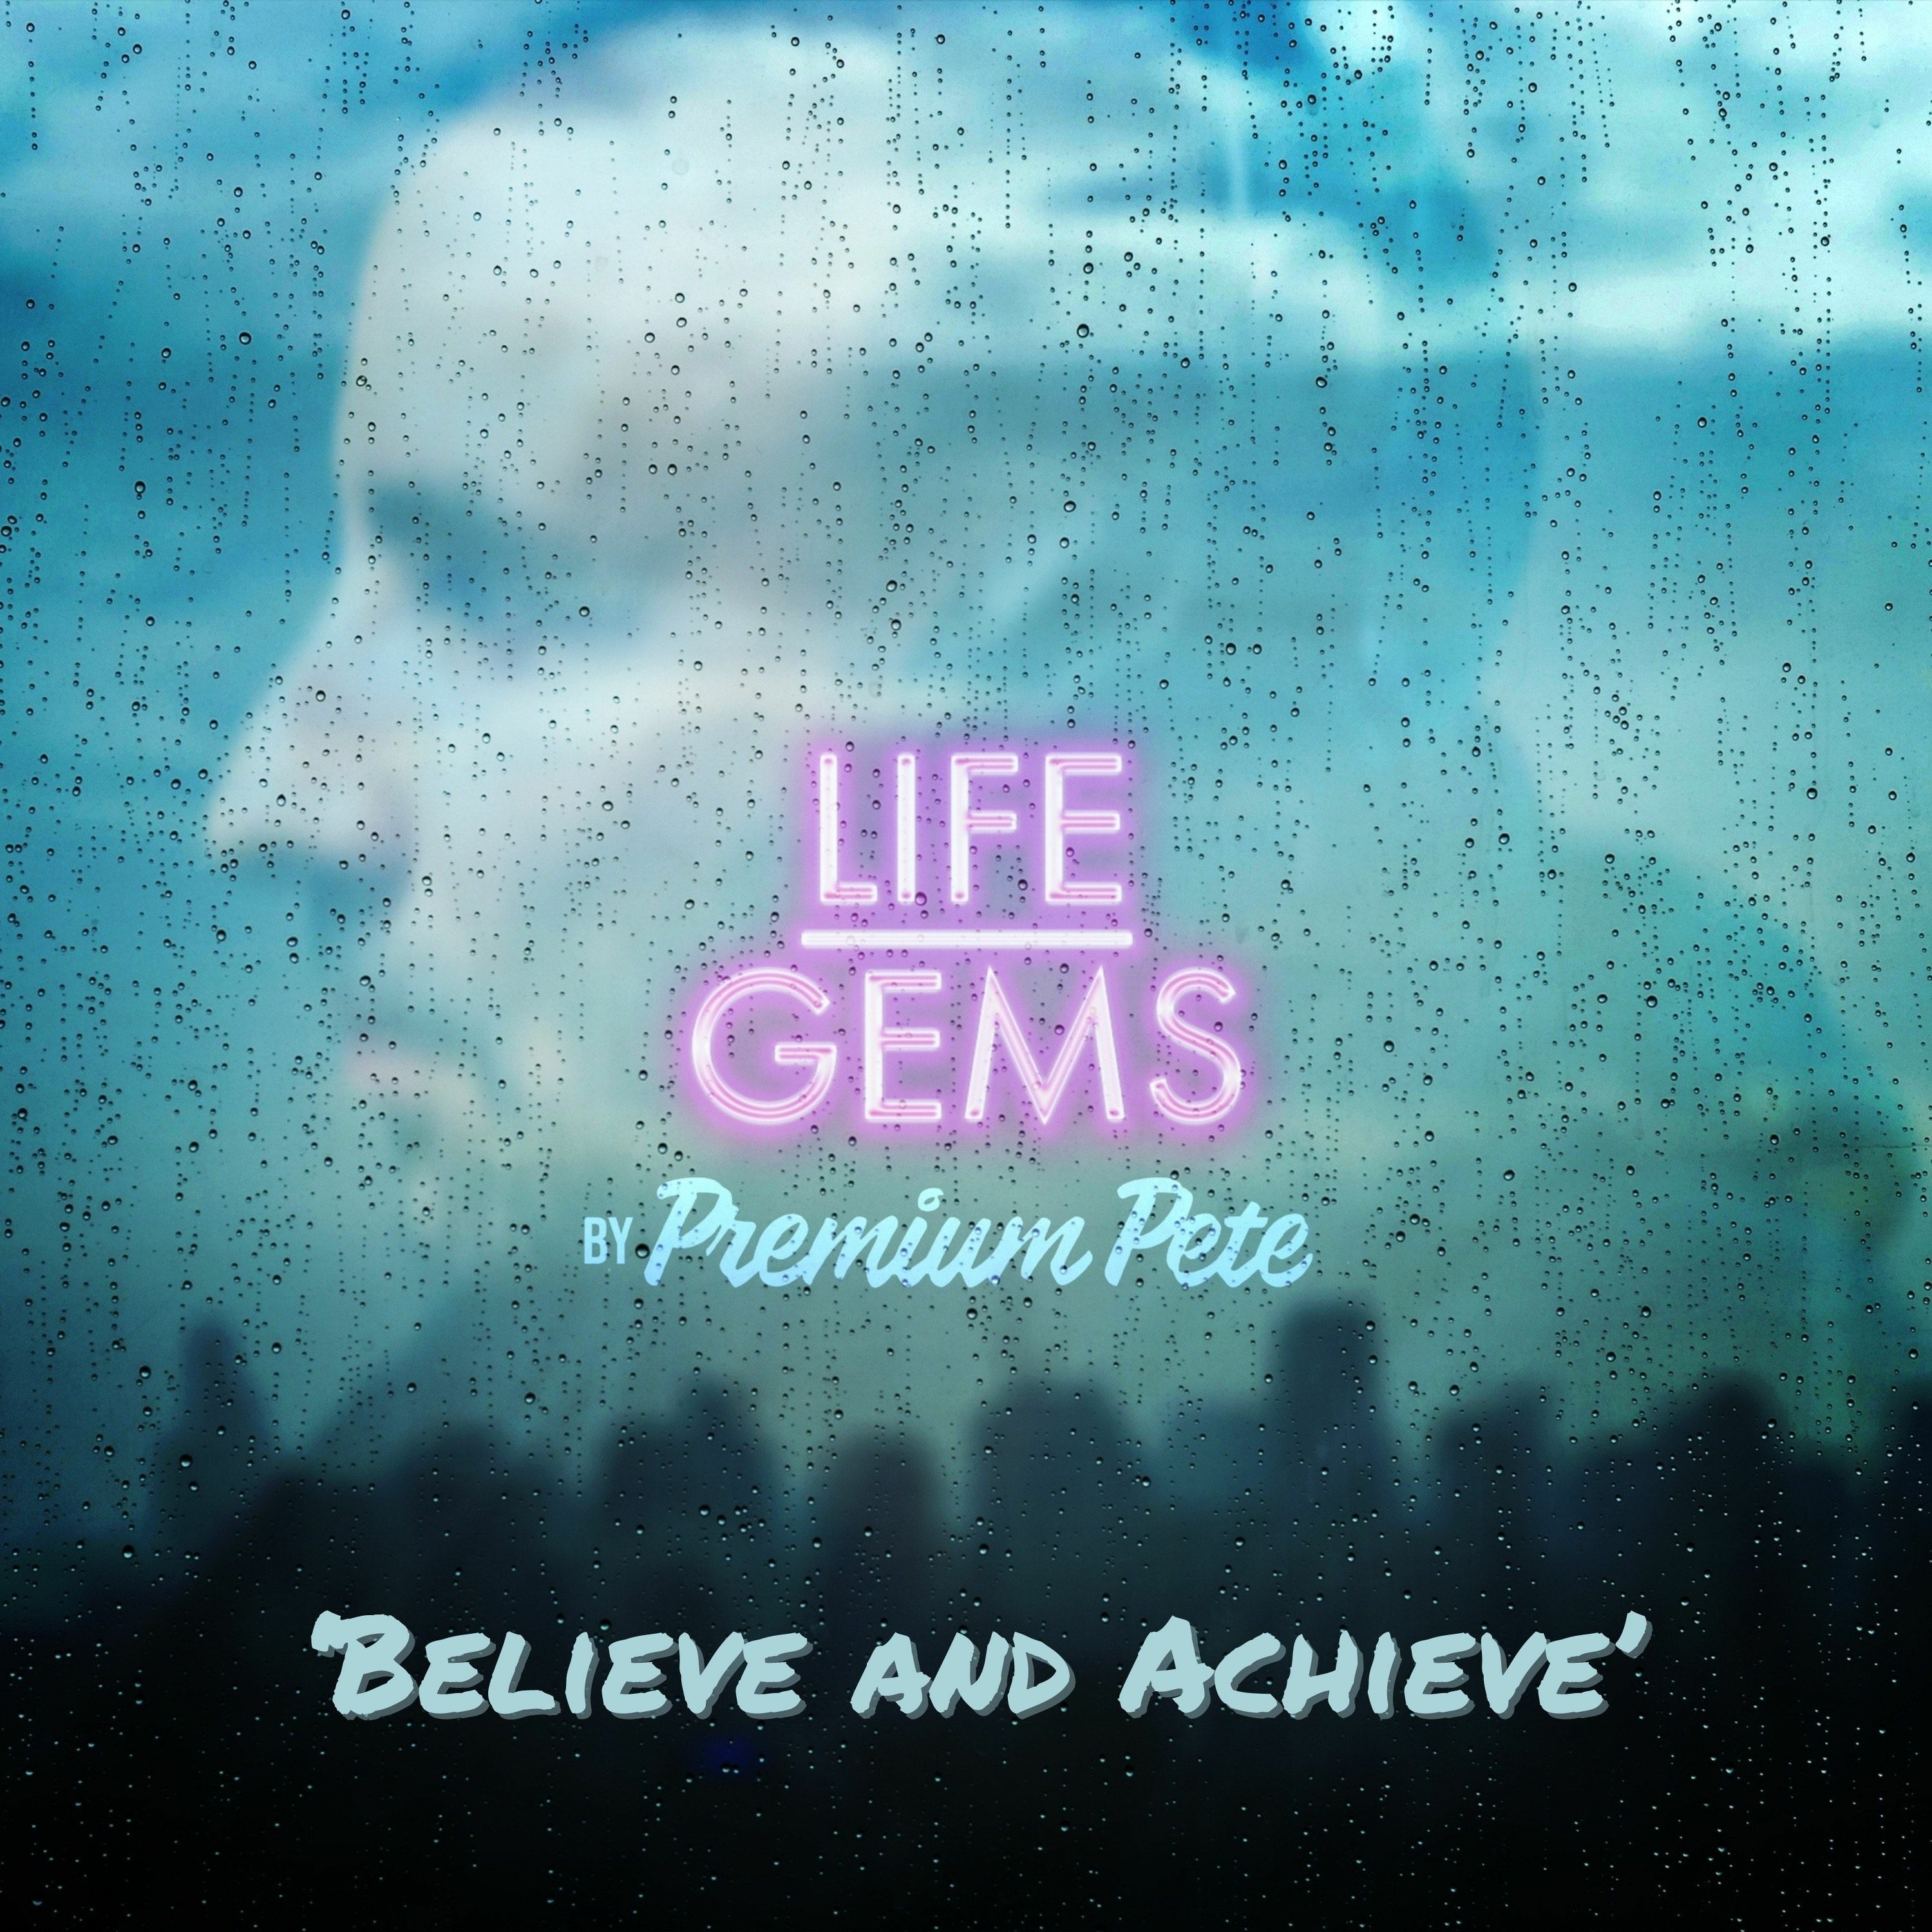 Life Gems ”Believe and Achieve”